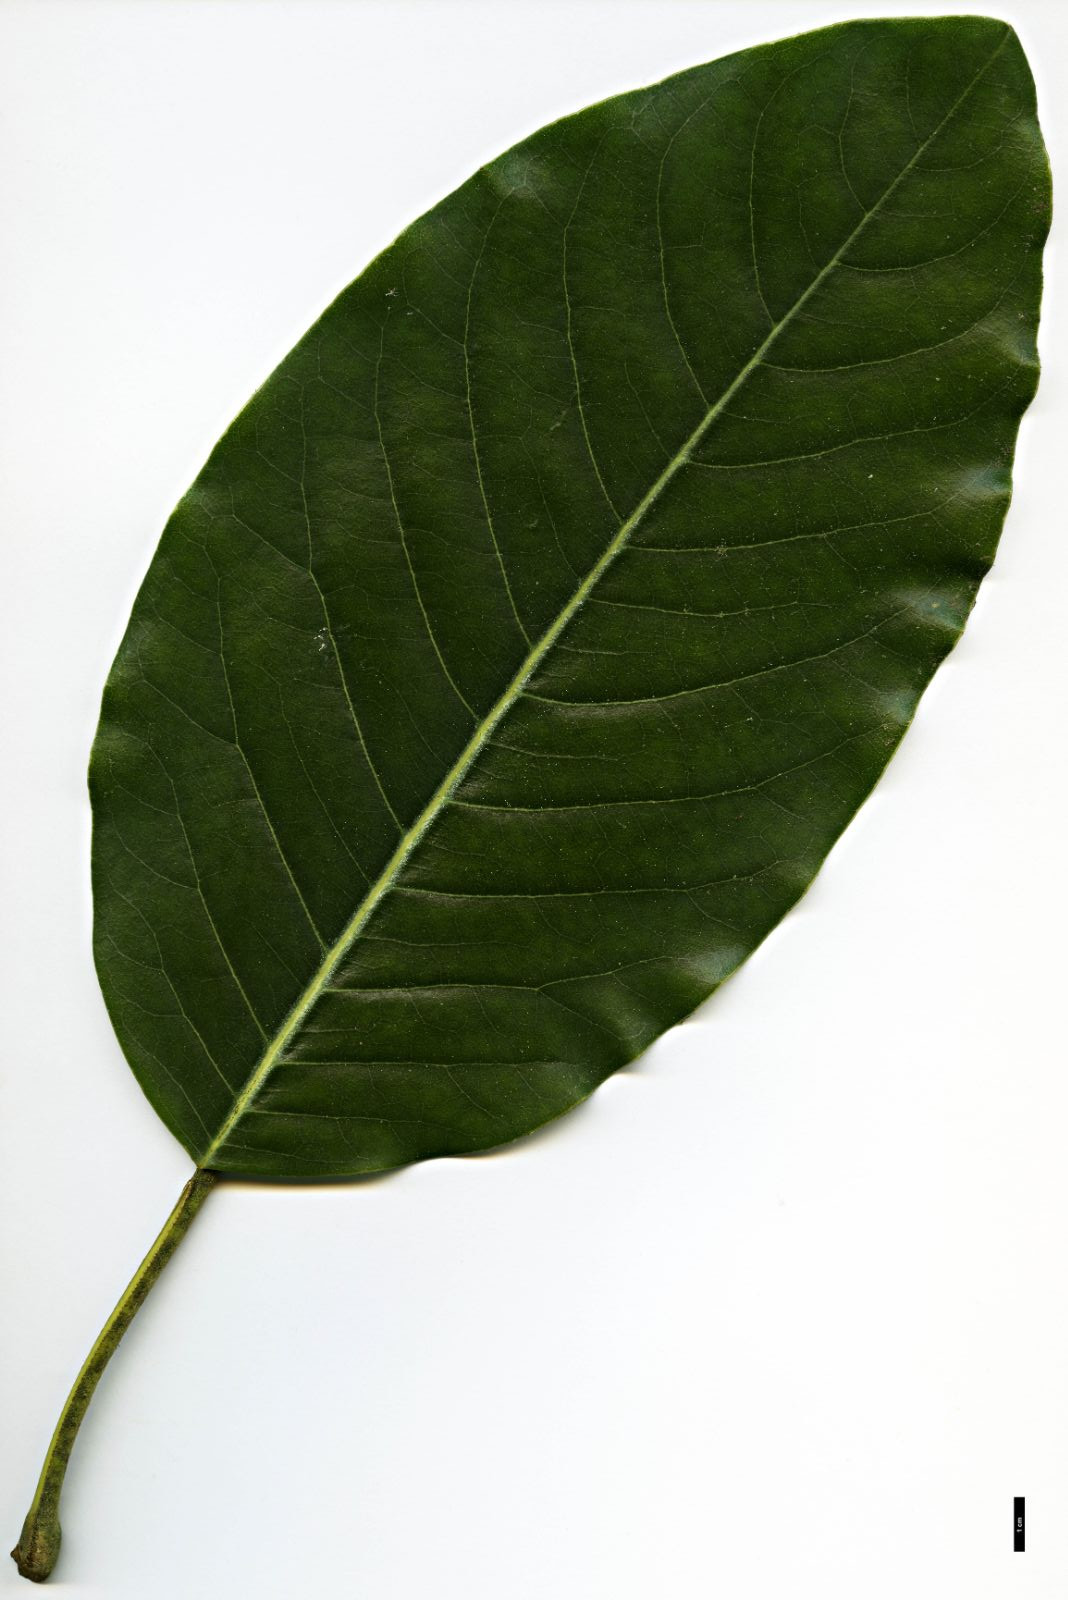 Magnolia delavayi - Trees and Shrubs Online